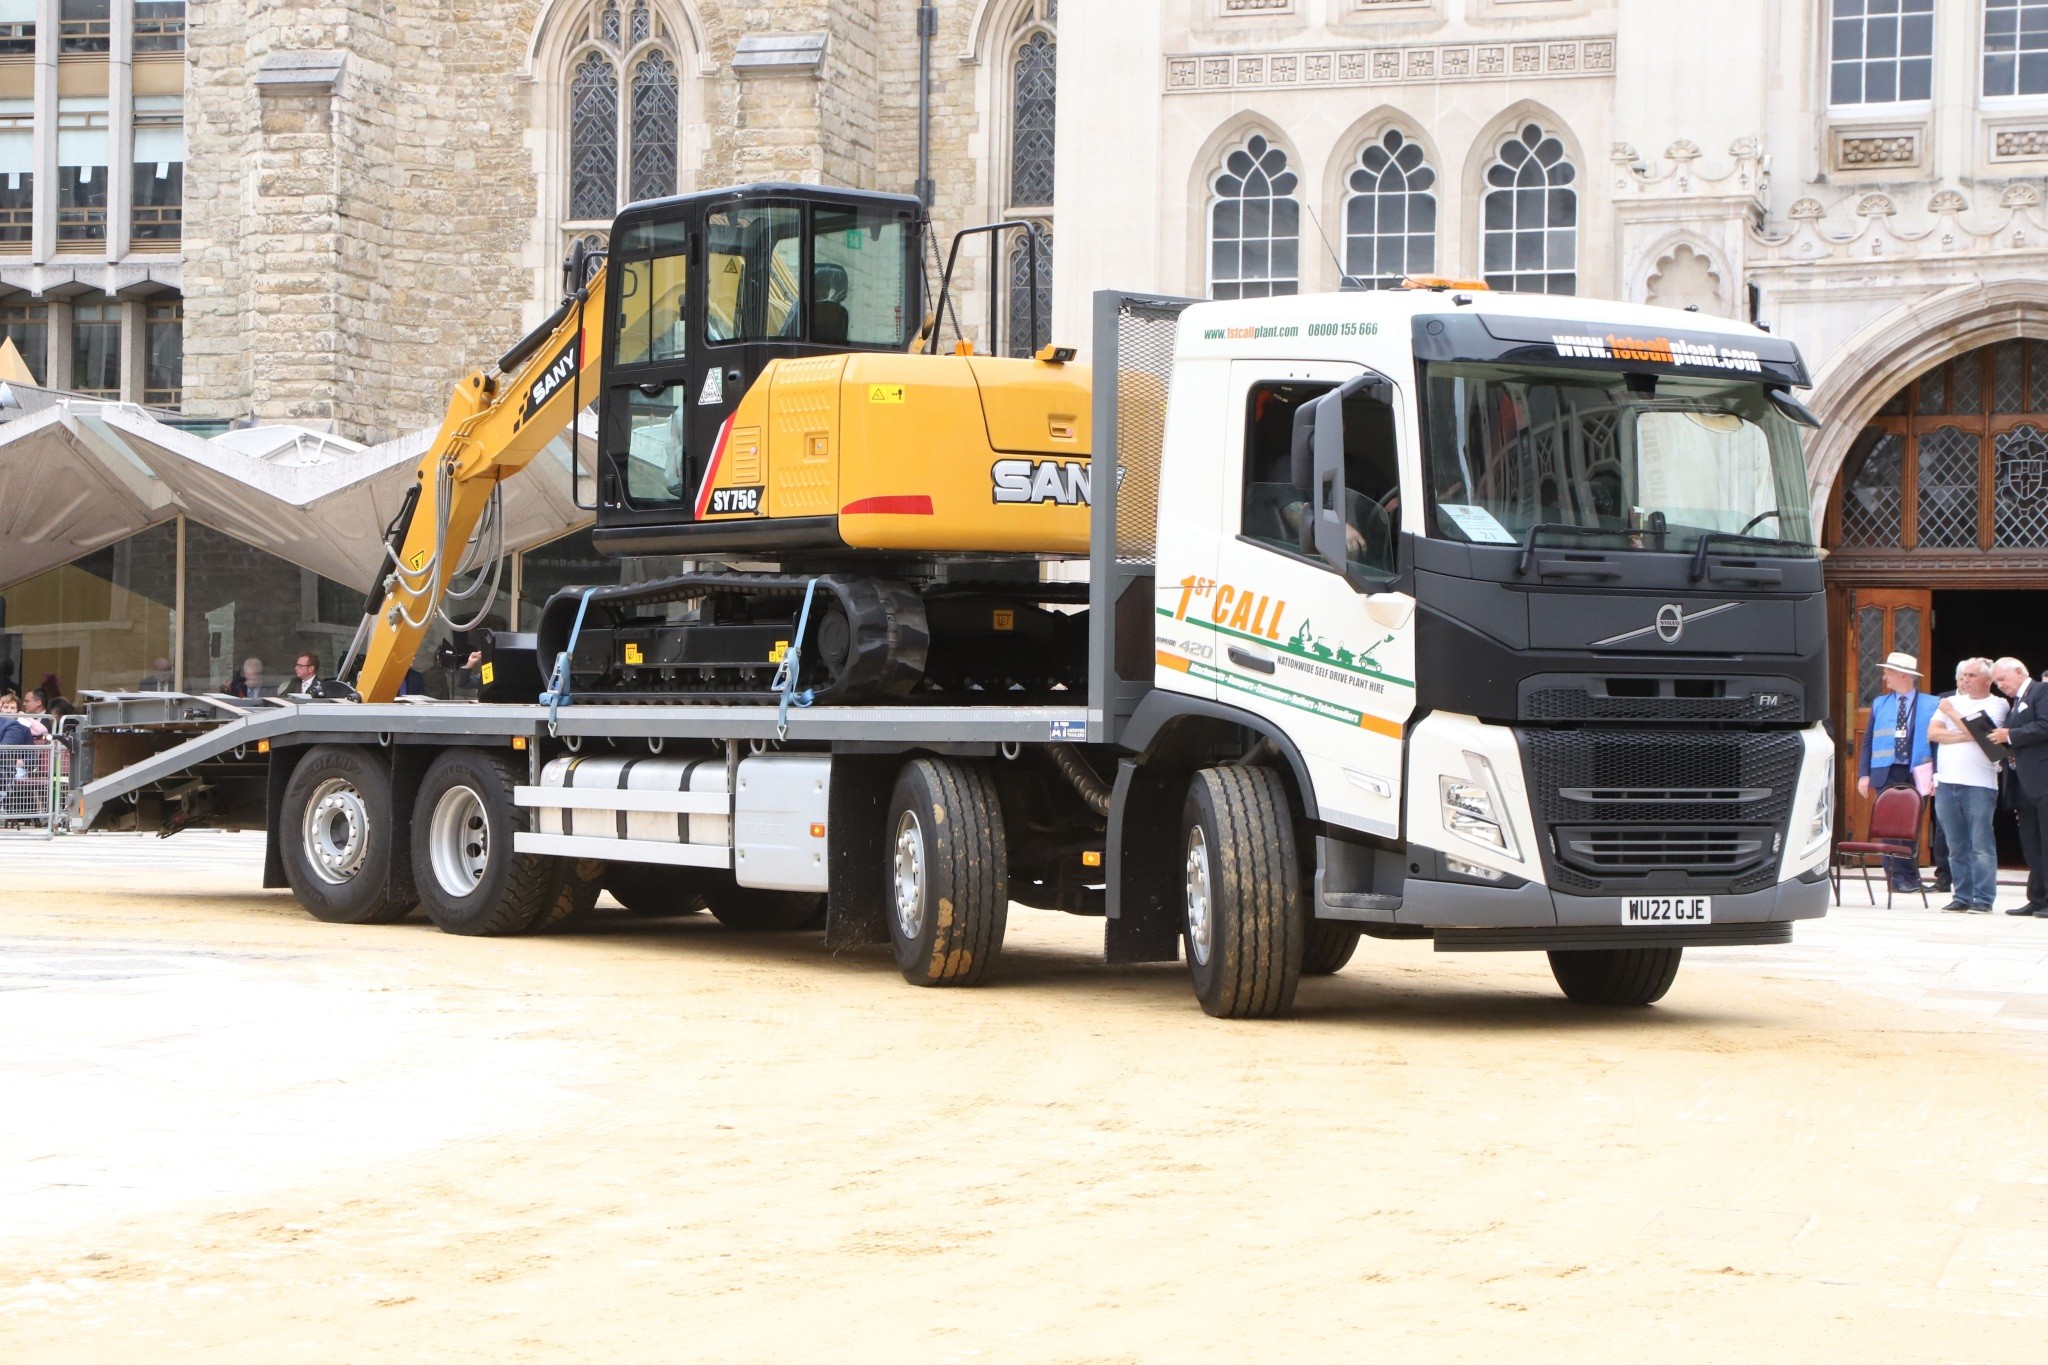 Volvo FM WU22GJE. City of London 2023 Cart Marking in Guildhall Yard on 22-Jul-2023. Hosted by the Worshipful Company of Carmen with the Lord Mayor of the City of London in attendance. Wooden plates on the vehicles are branded with hot irons to allow them to ply for trade in the Square Mile. Another of the City Livery Company's annual ceremonies.